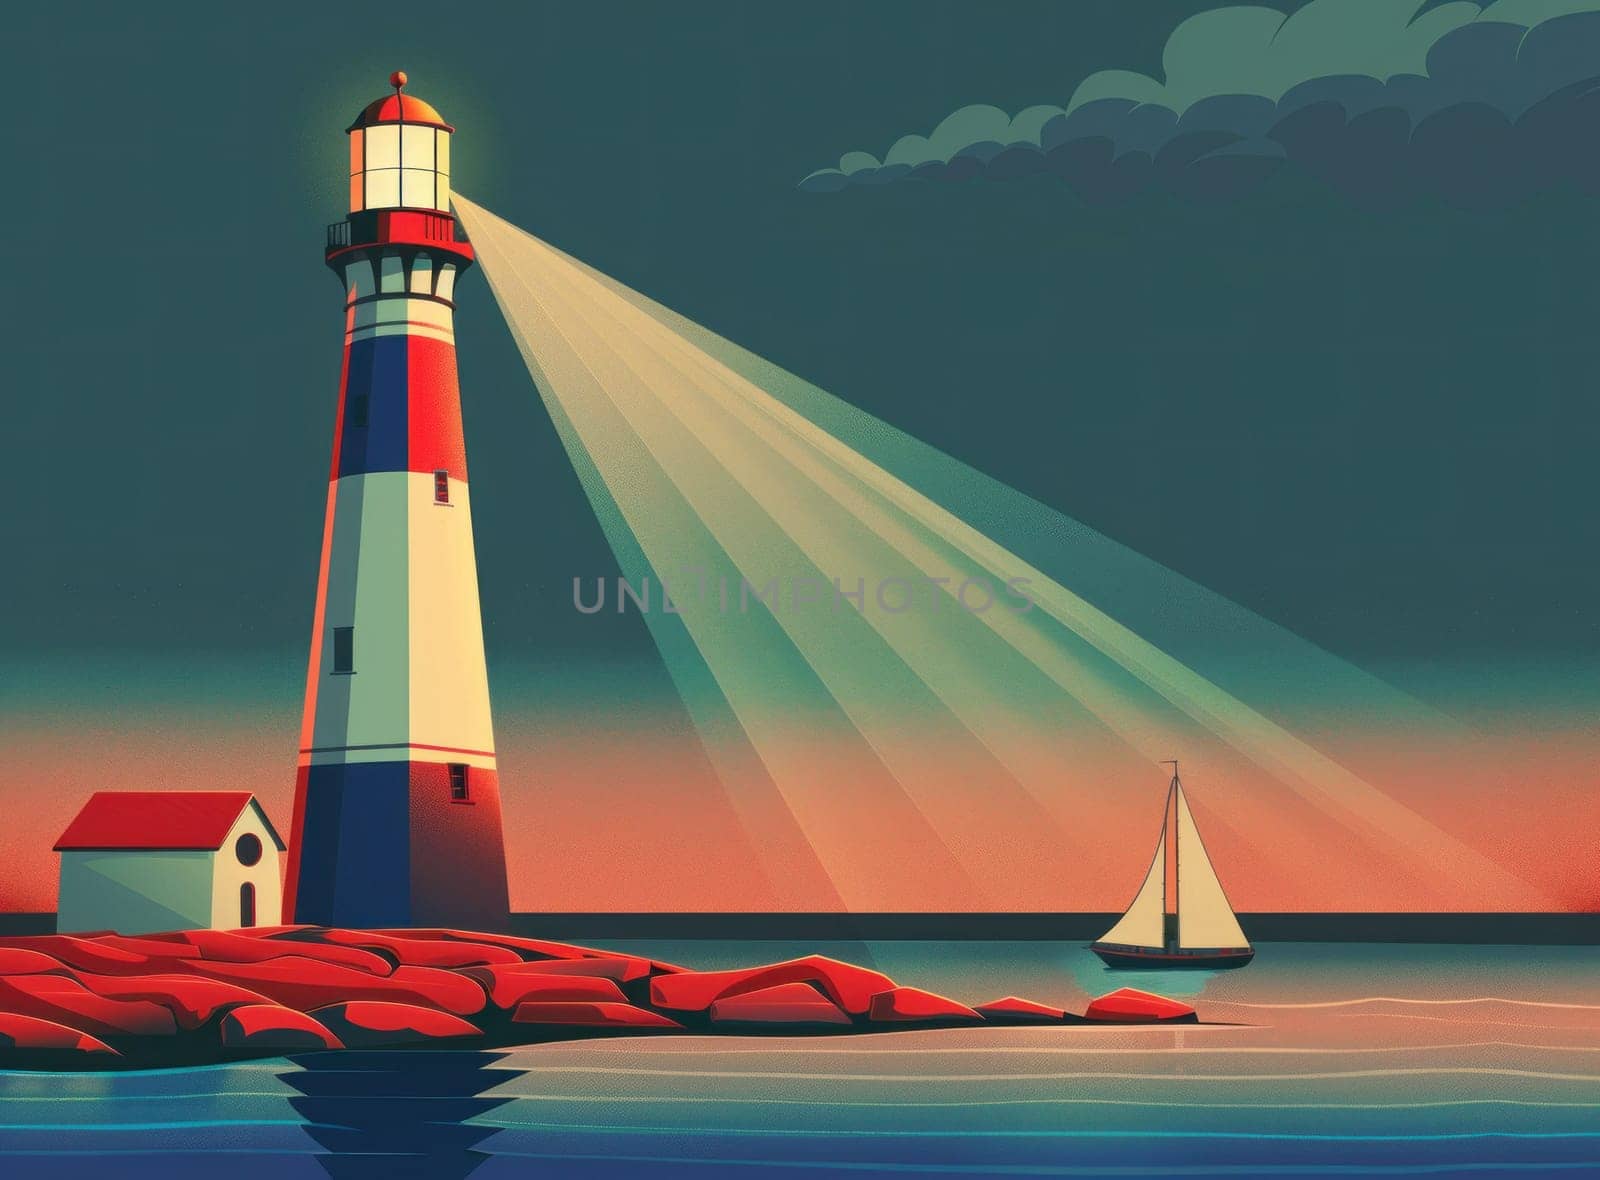 Scenic sunset view of lighthouse with sailboats in distance on ocean travel adventure landscape illustration by Vichizh